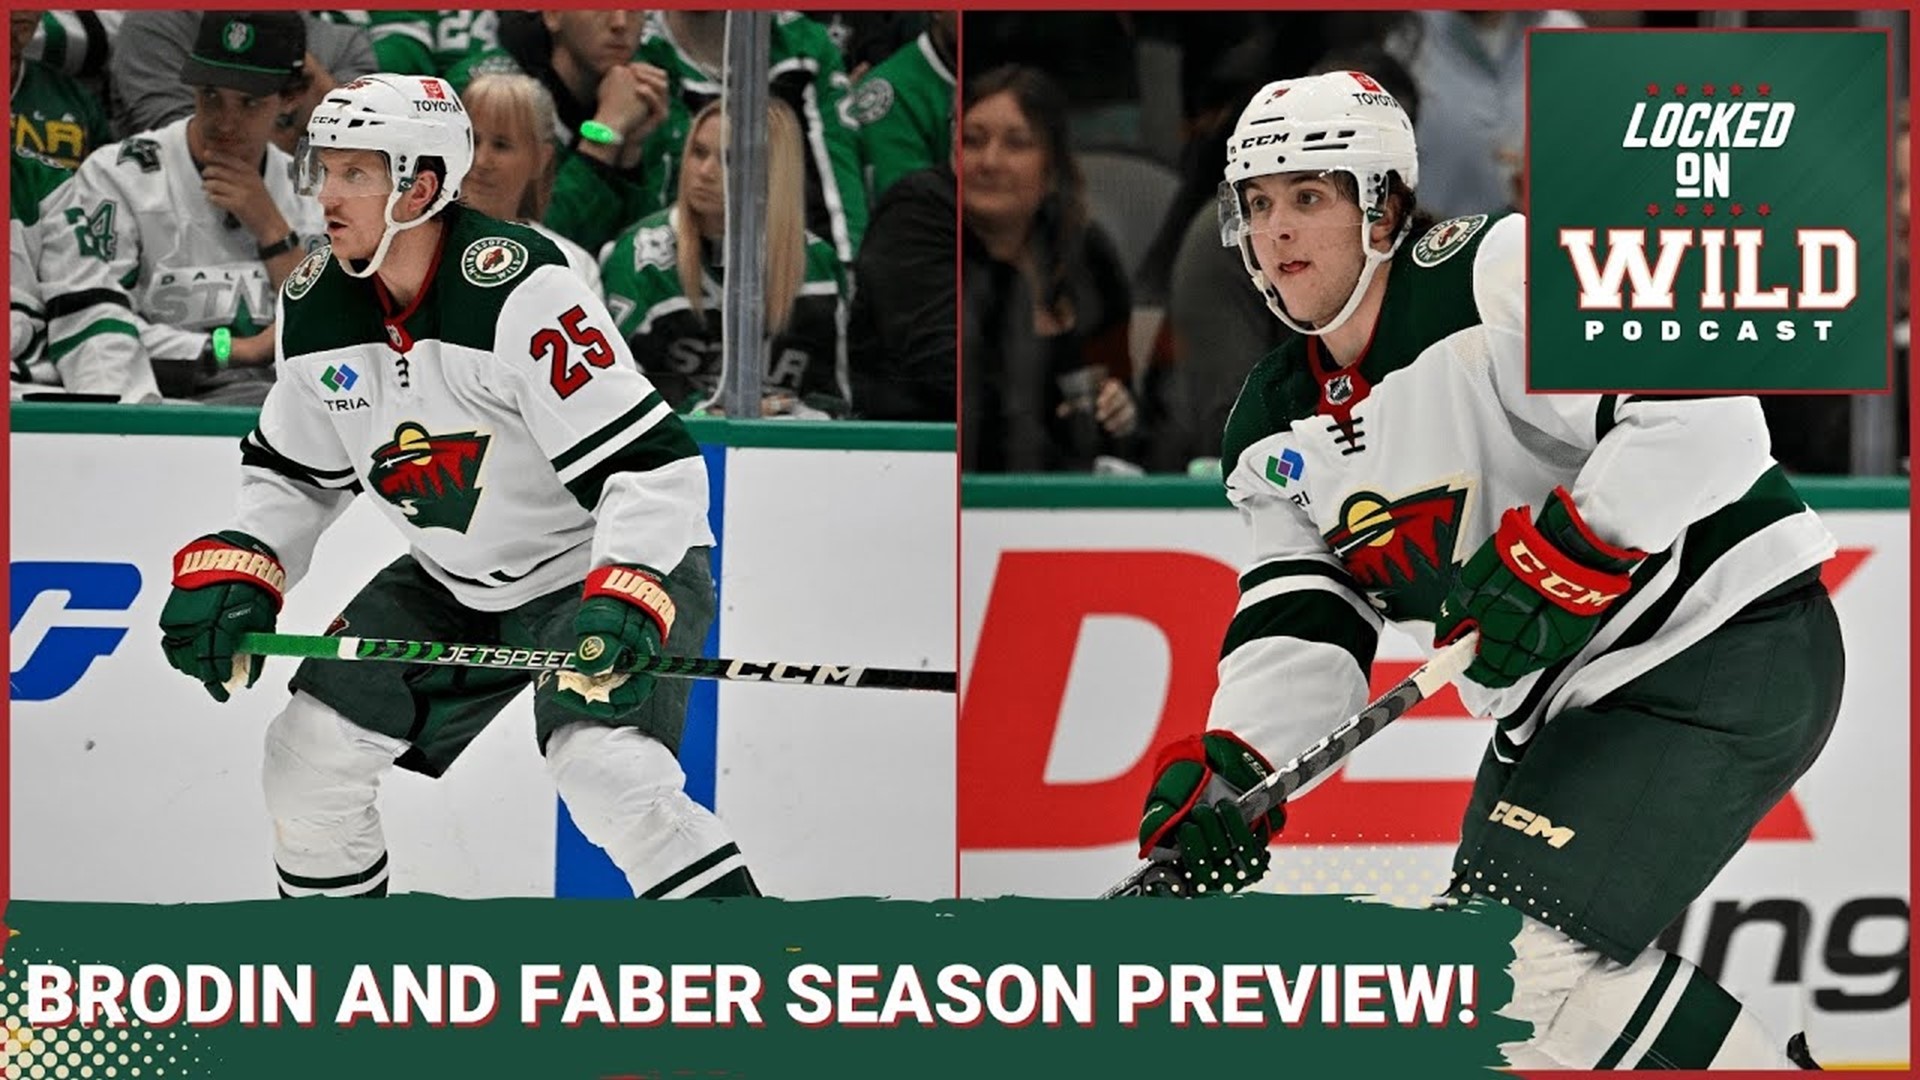 On today's episode of Locked on Wild, we preview the 2023-24 season for Jonas Brodin and Brock Faber.